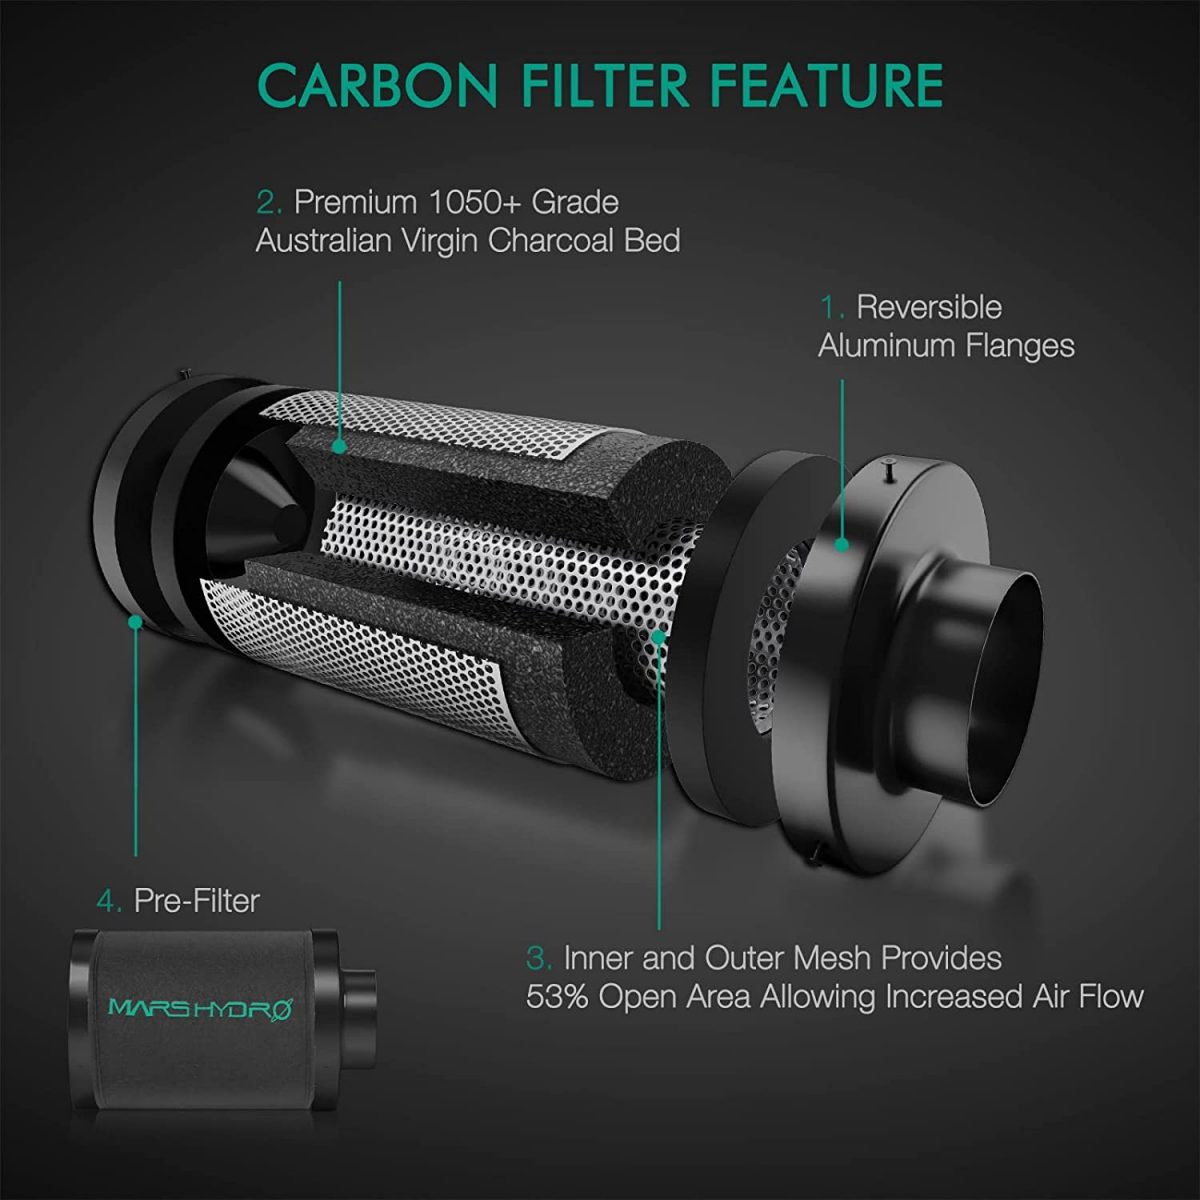 Mars Hydro Carbon Filter